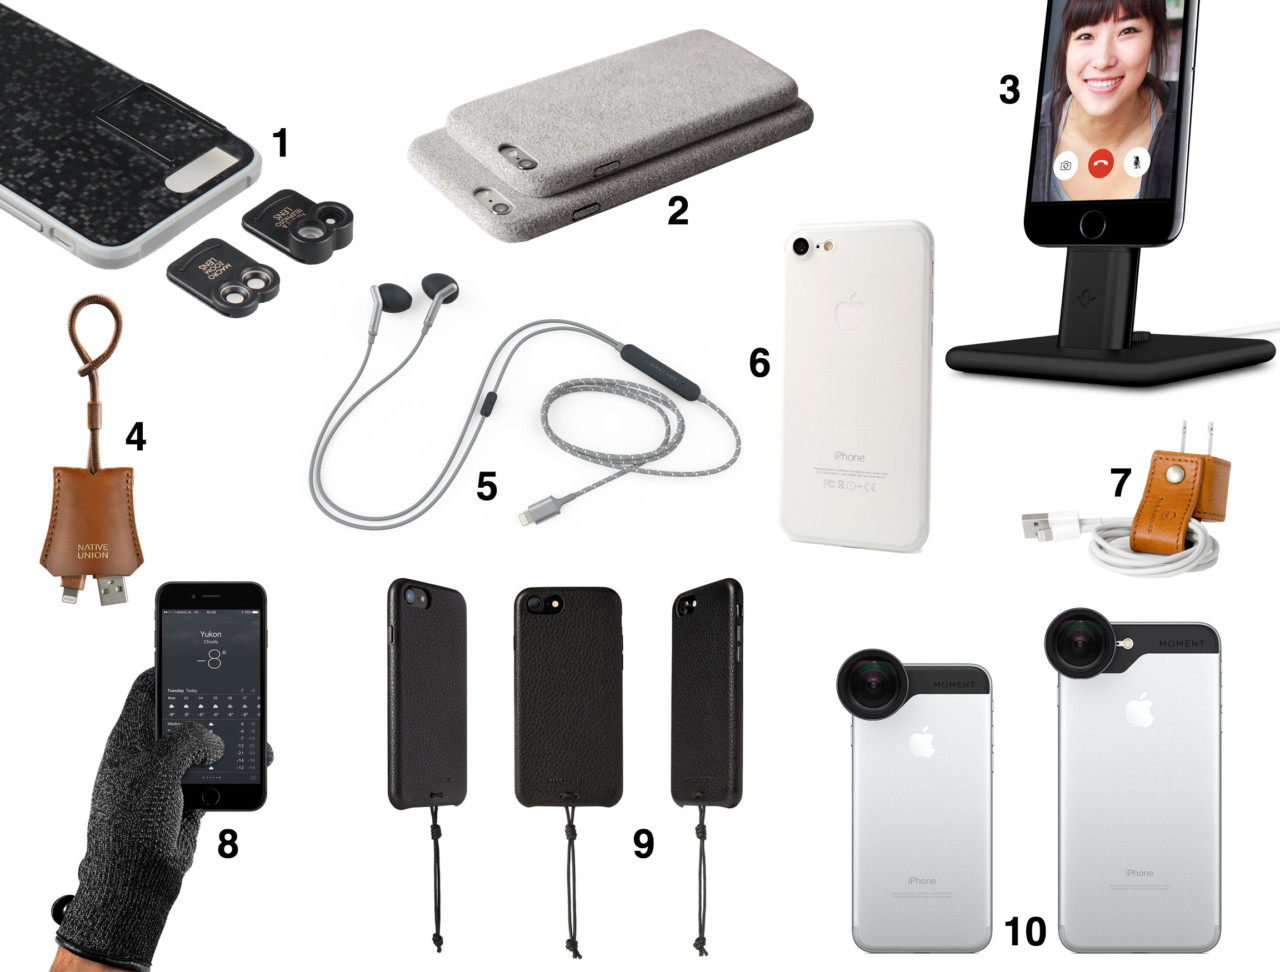 Accessories for the Apple 7